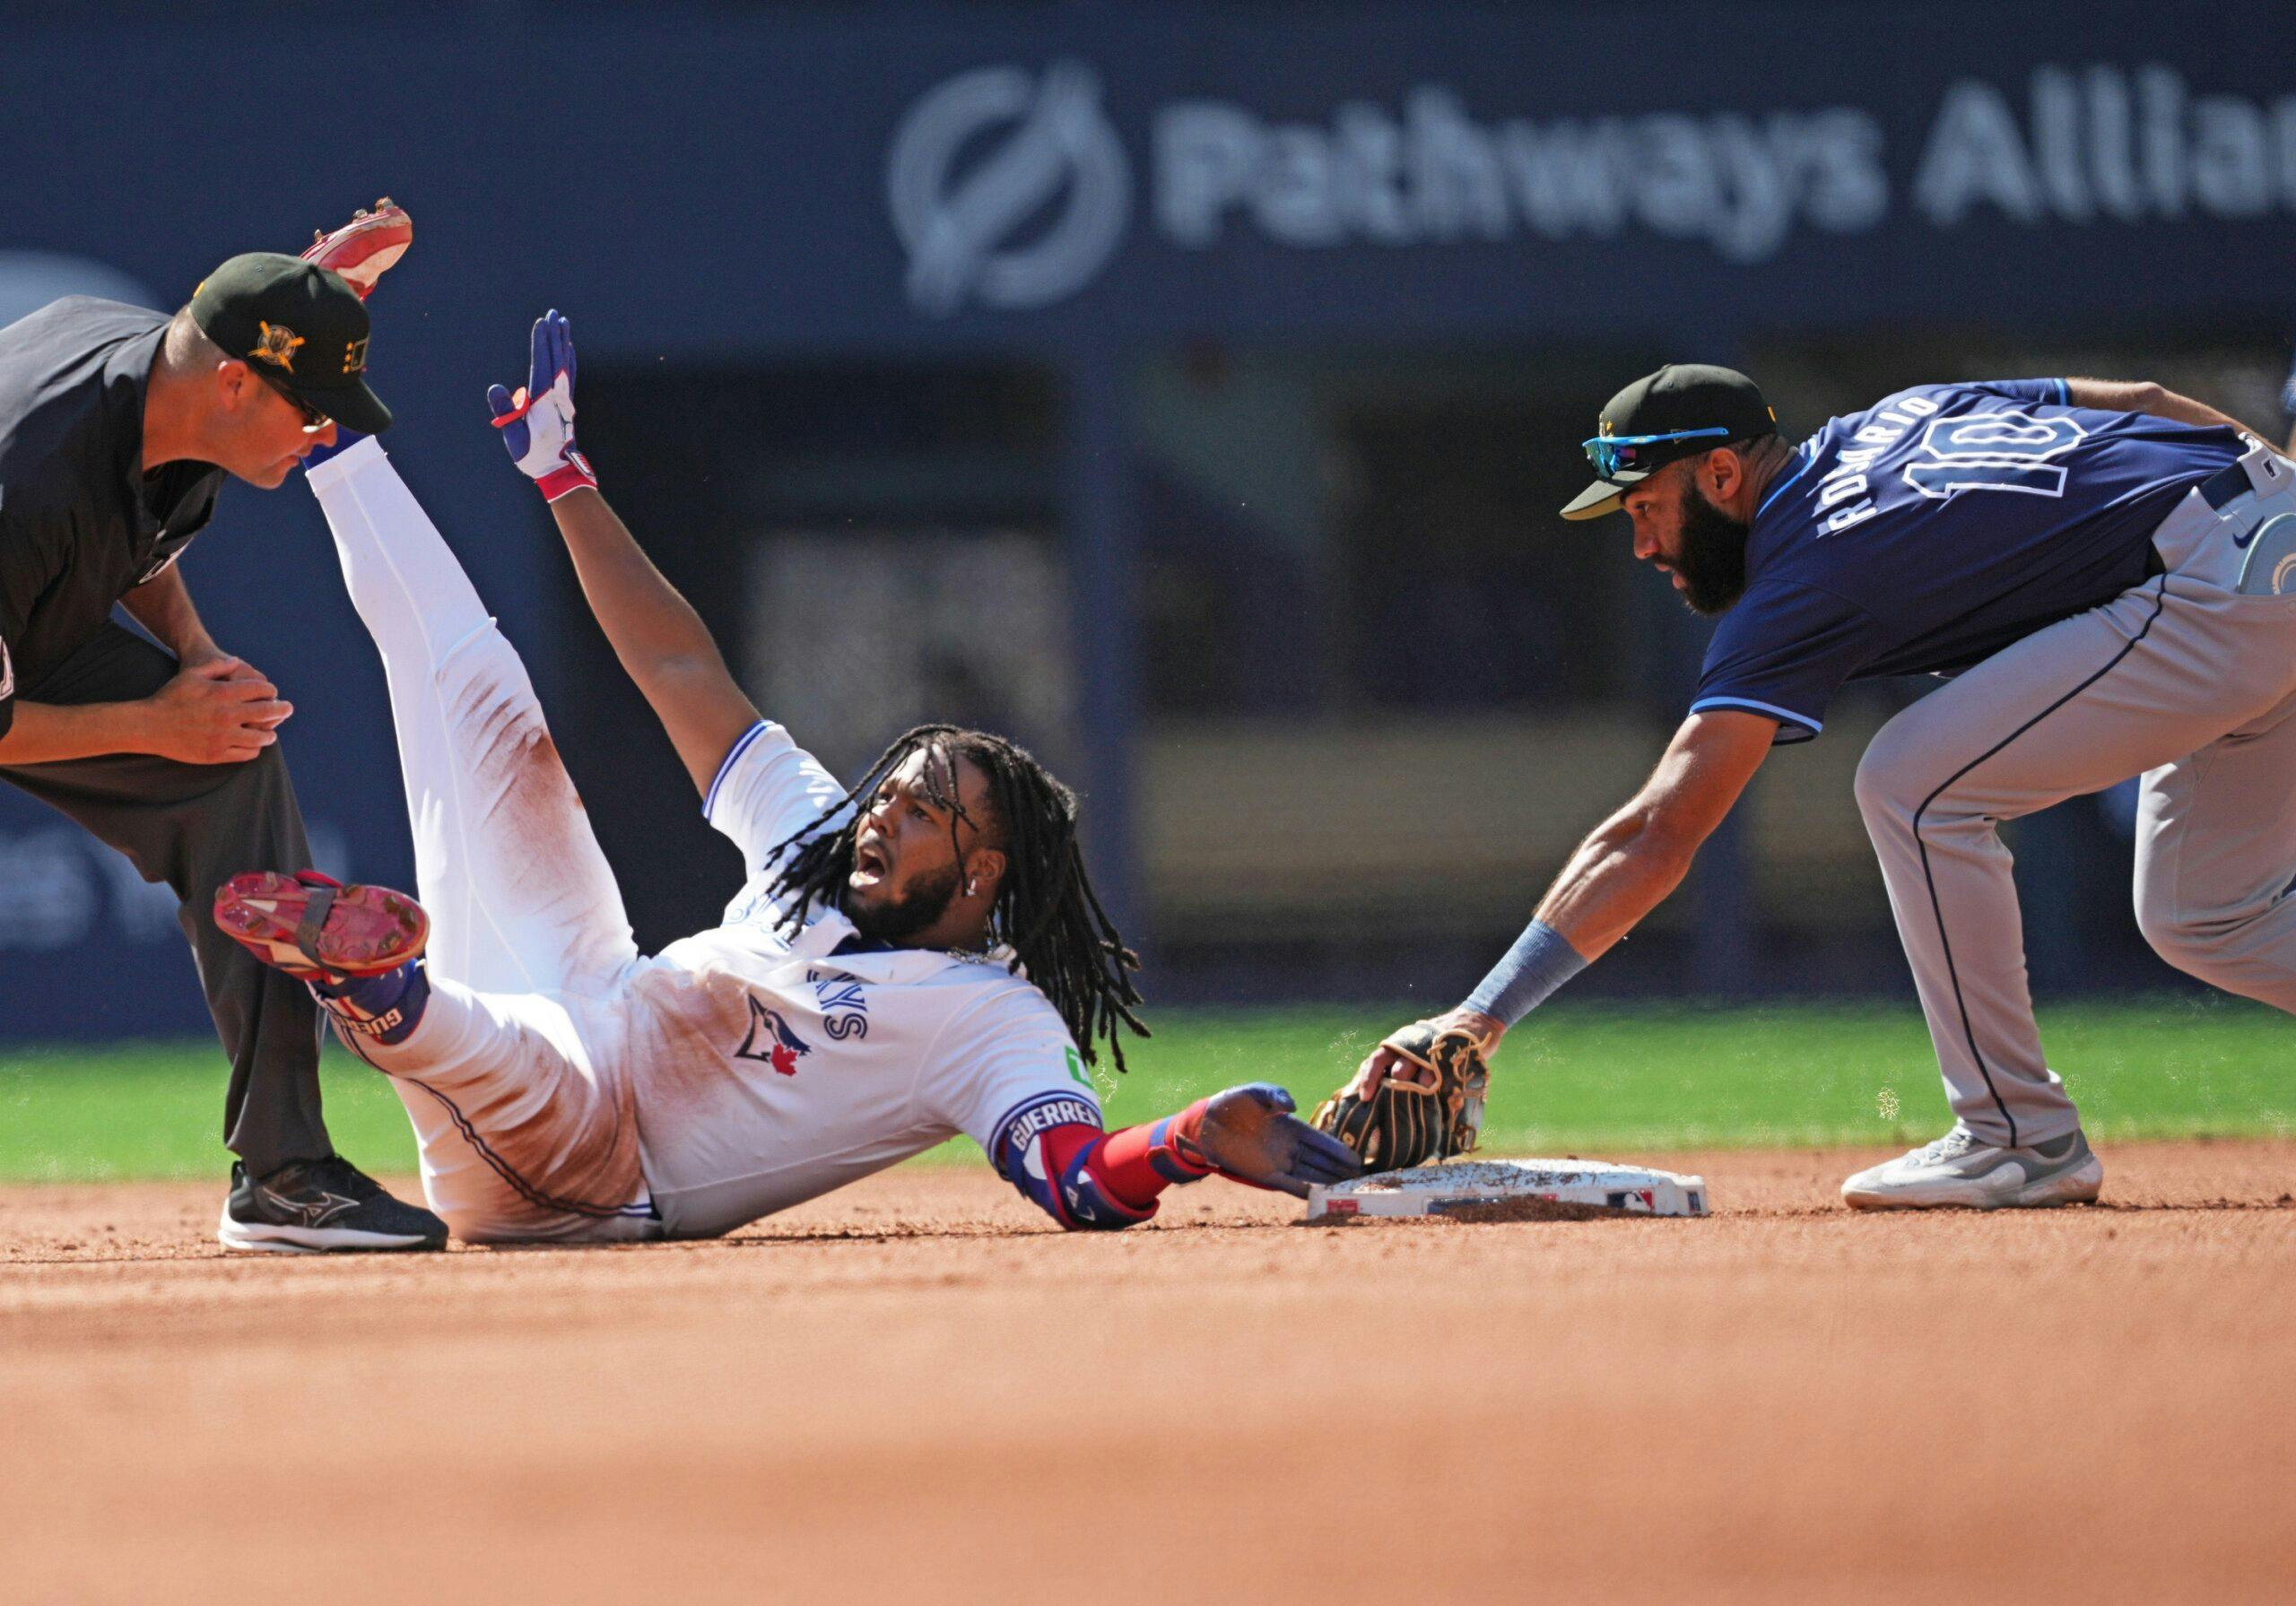 Toronto Blue Jays first base Vladimir Guerrero Jr. (27) is safe at second base ahead of the tag from Tampa Bay Rays second baseman Amed Rosario (10) after hitting a double during the fourth inning at Rogers Centre.